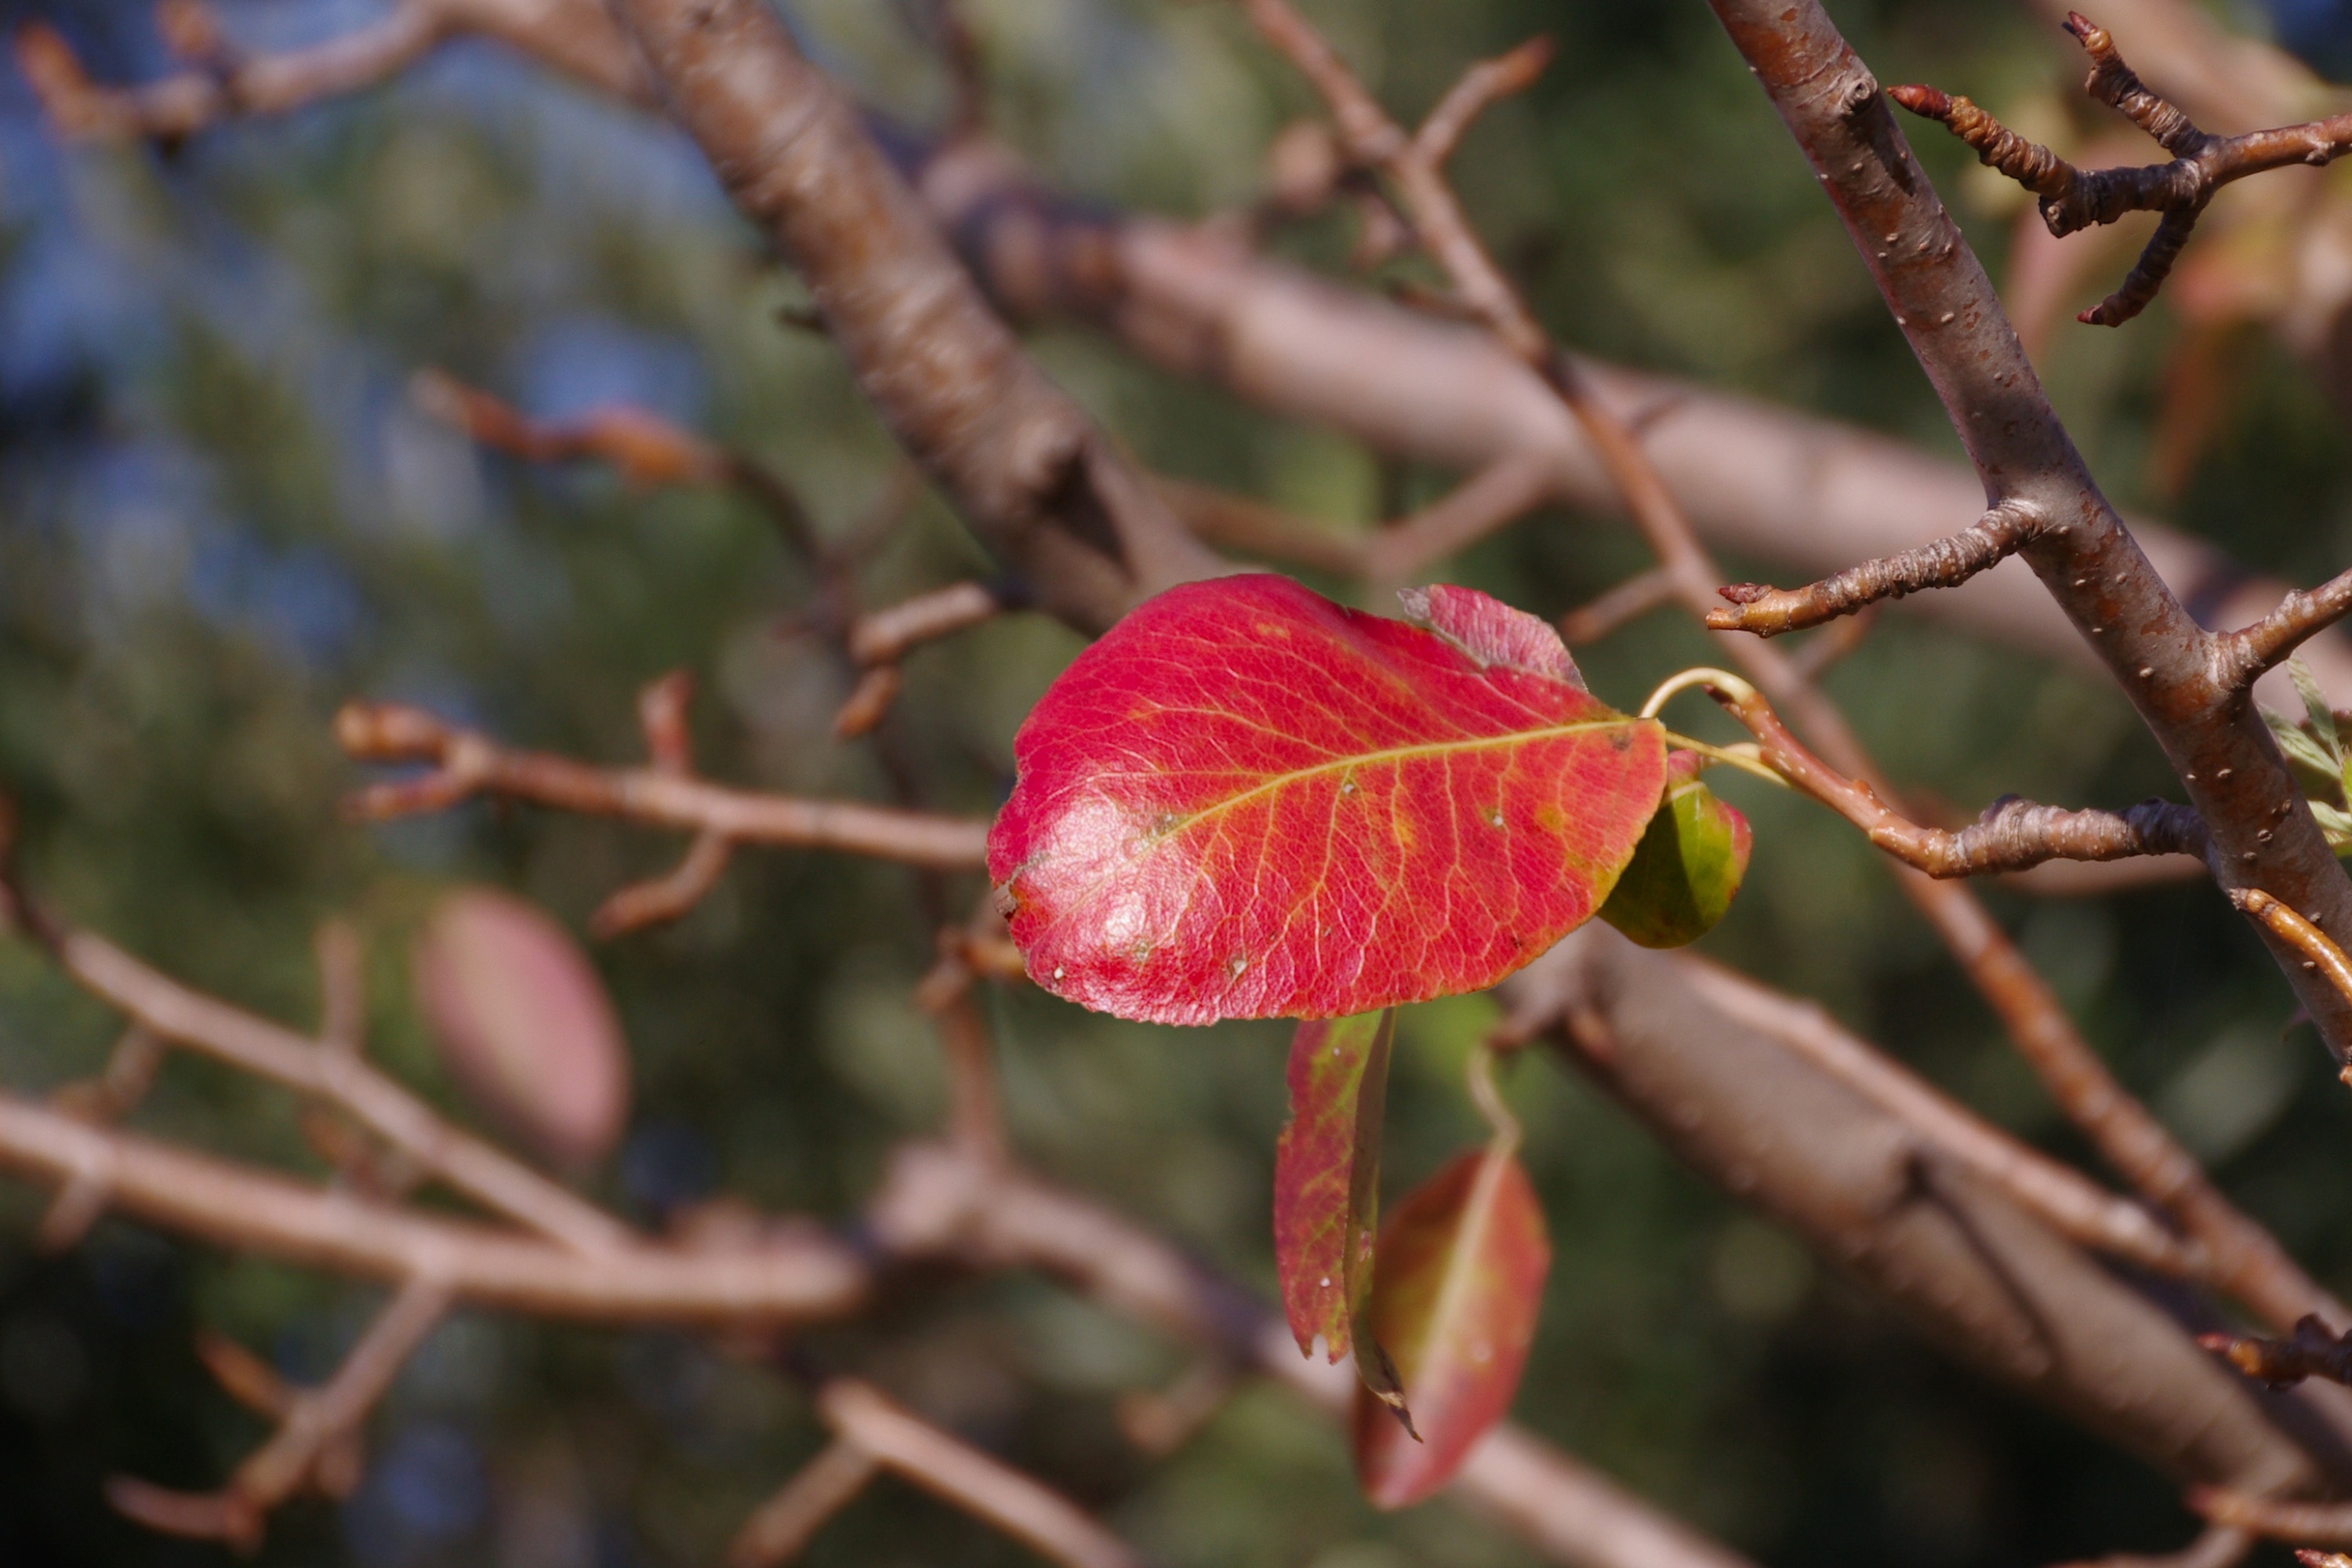 red leaves